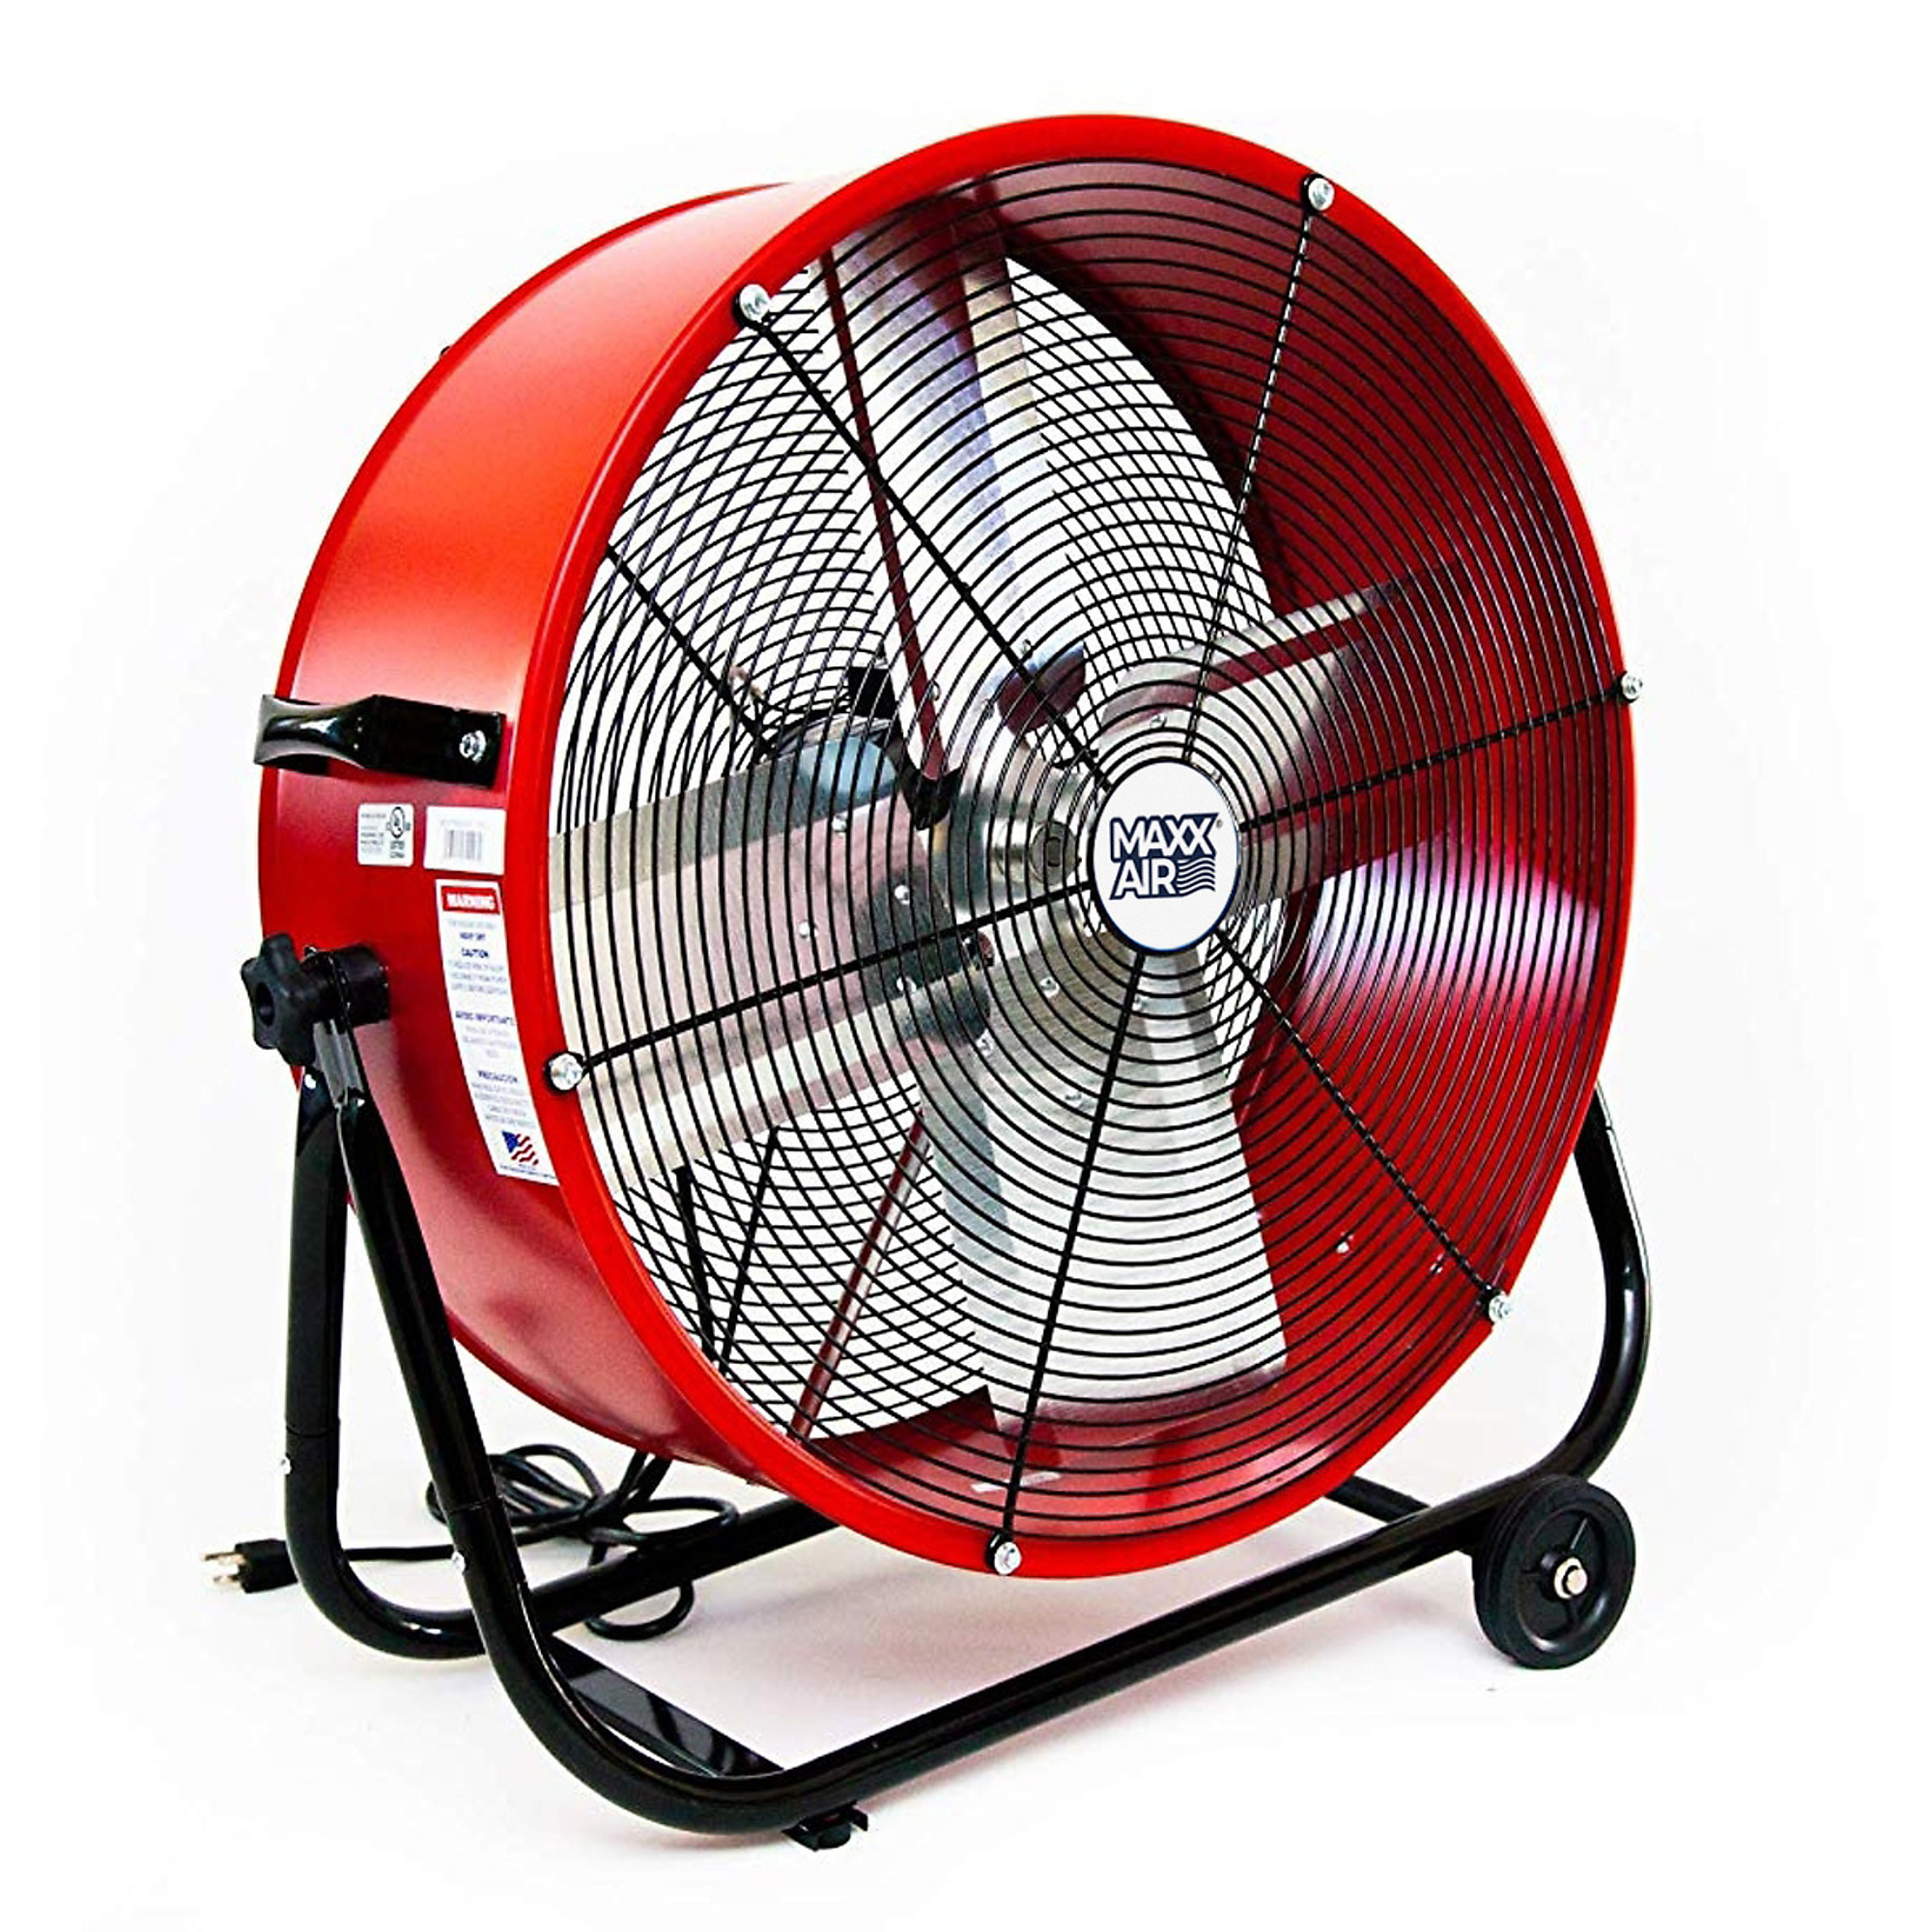 Maxx Air | Industrial Grade Air Circulator for Garage, Shop, Patio, Barn Use | 24-Inch High Velocity Drum Fan, Two-Speed, Red